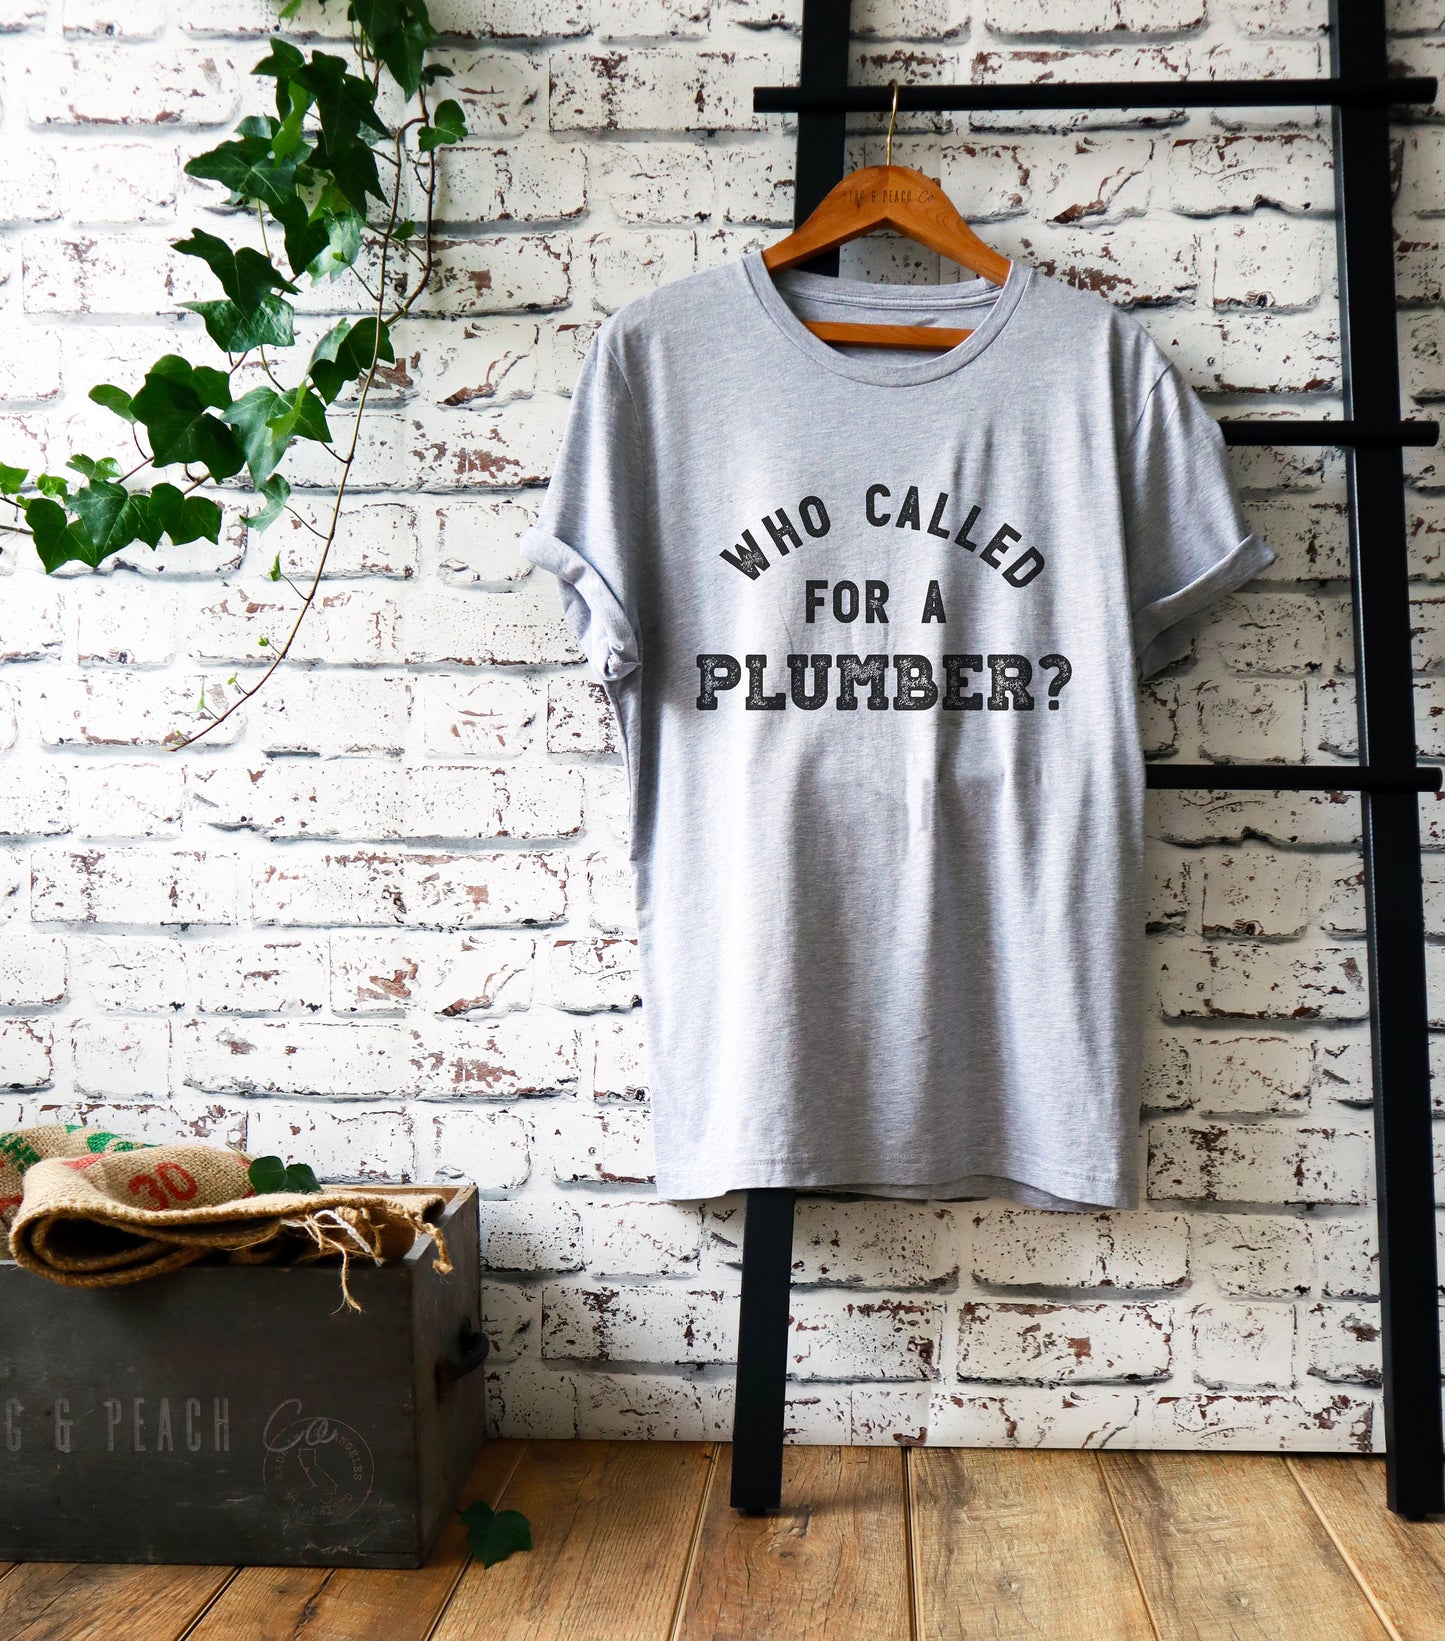 Who Called For A Plumber? Unisex Shirt - Plumber, Plumber T-Shirt, Plumbing Shirt, Plumber Gift, Fathers Day Gift, Gift For Dad